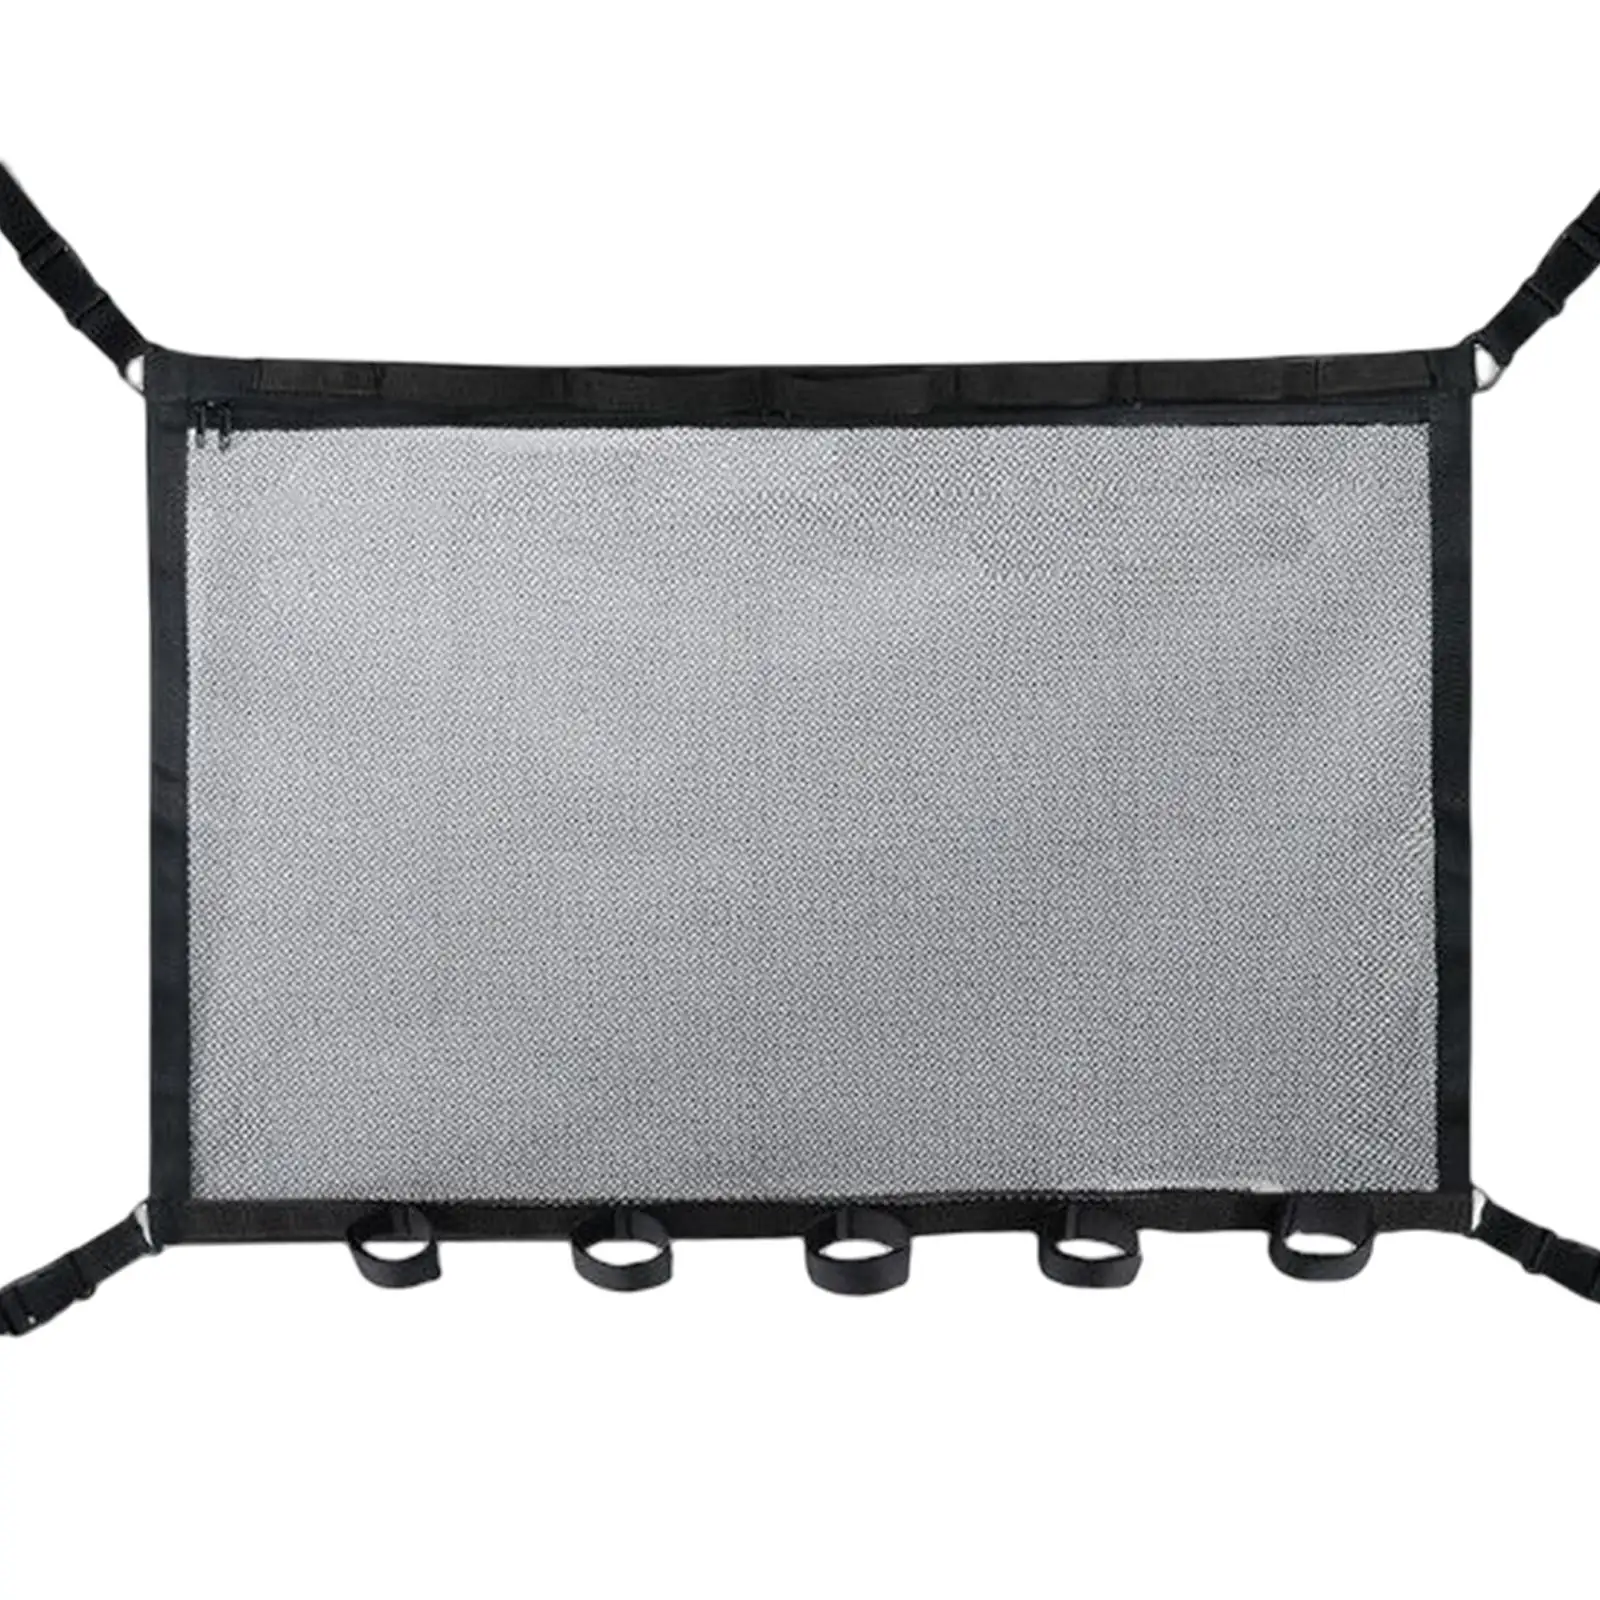 Mesh Car Roof Organizer Rod Holder Interior Accessories for Camping Truck